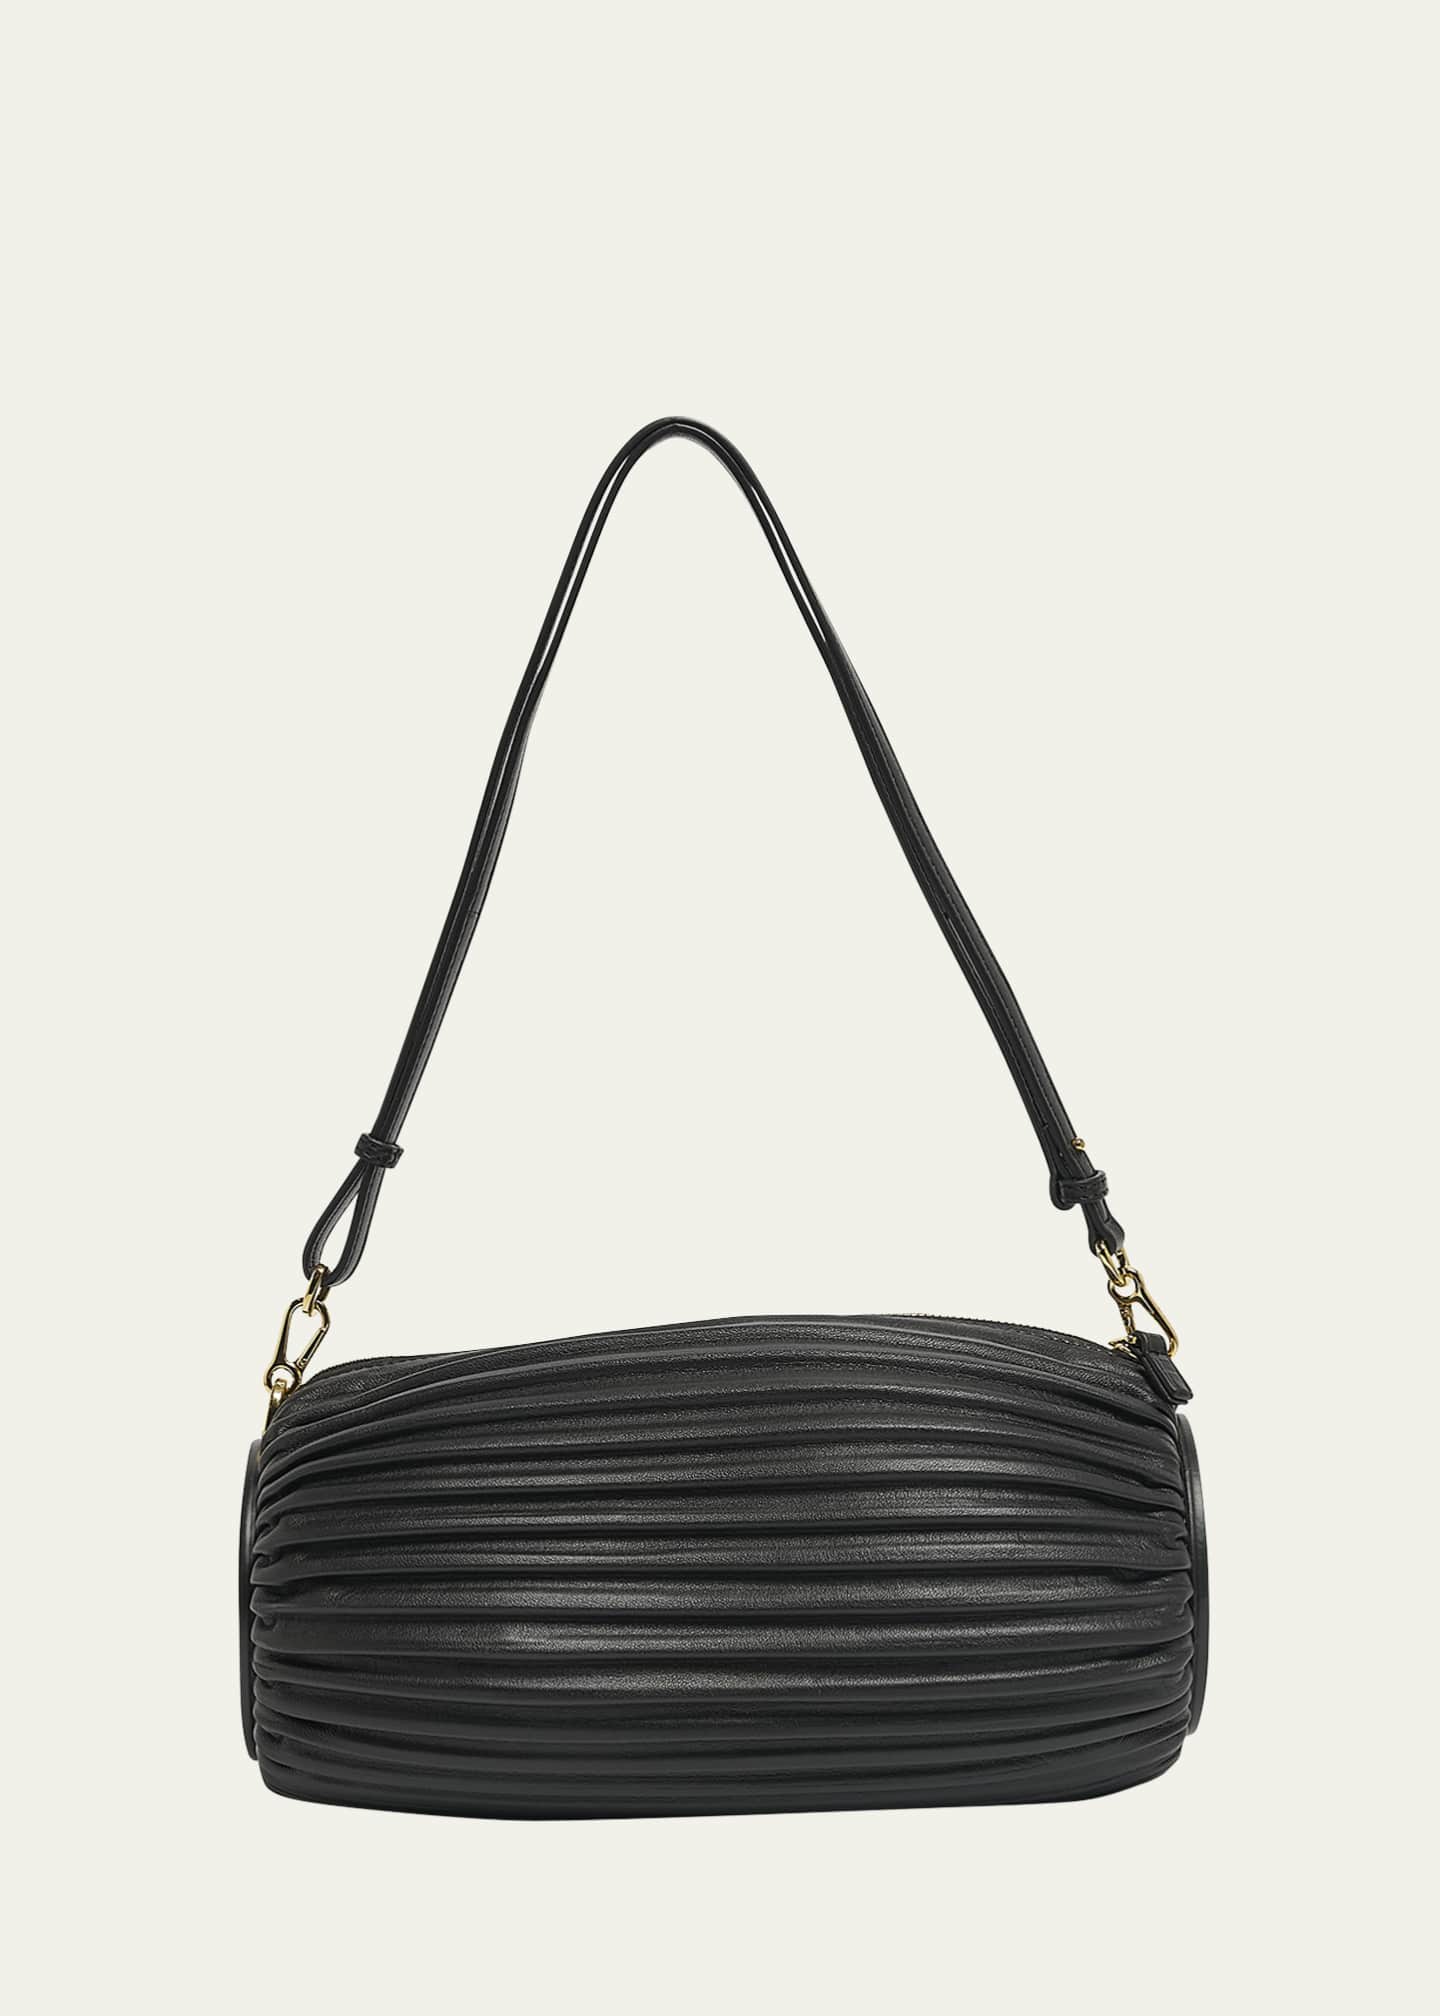 Loewe x Paula’s Ibiza Bracelet Pouch in Pleated Napa Leather with Leather  Strap